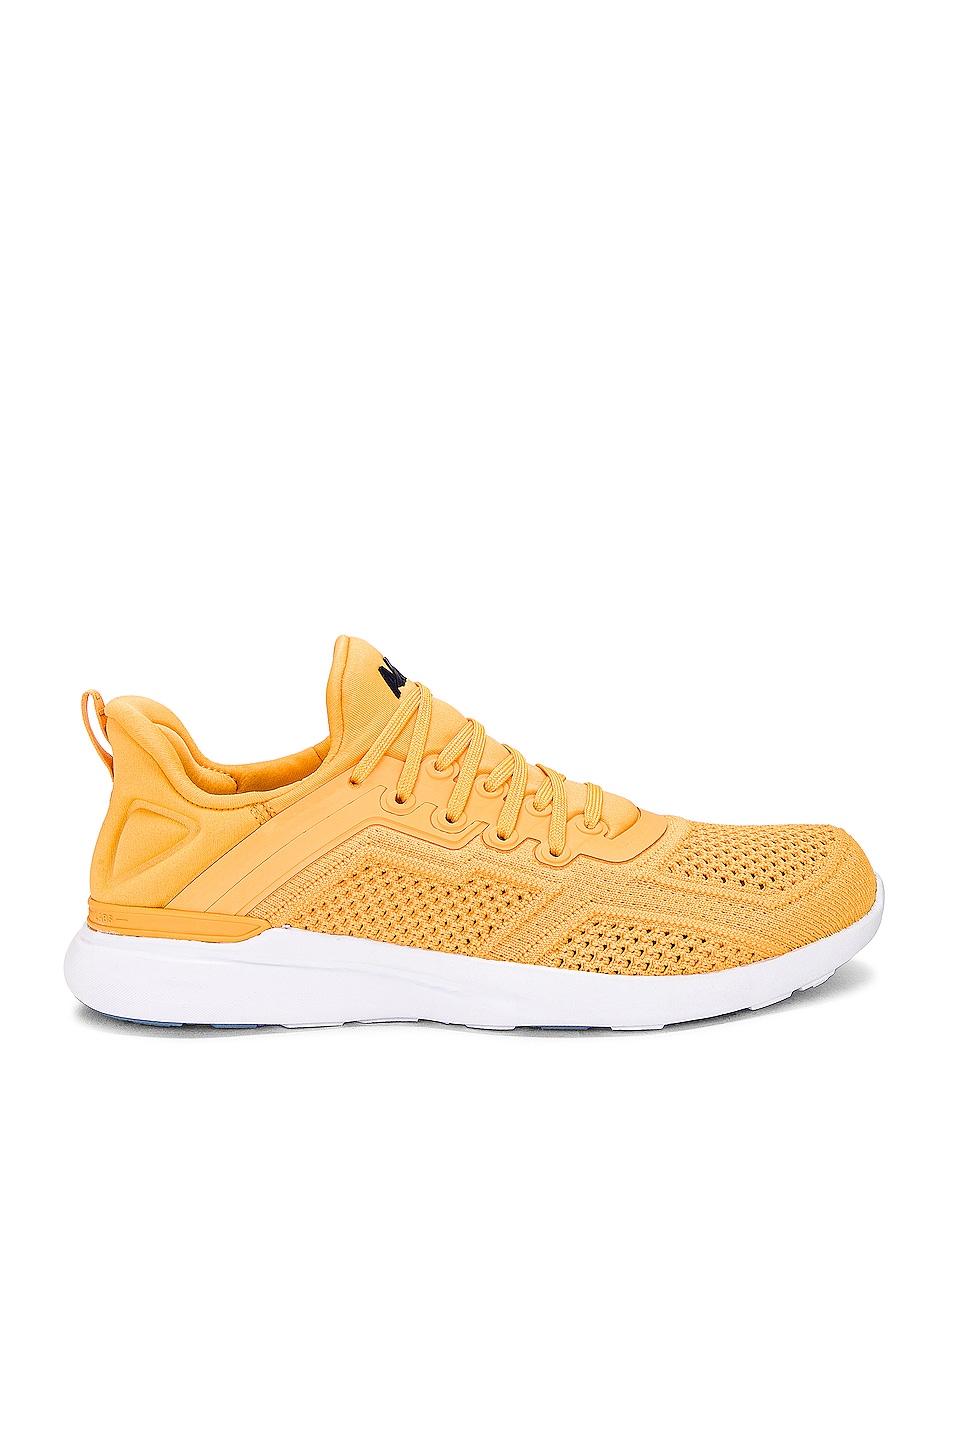 Image 1 of APL: Athletic Propulsion Labs Techloom Tracer in Mango & Navy & White